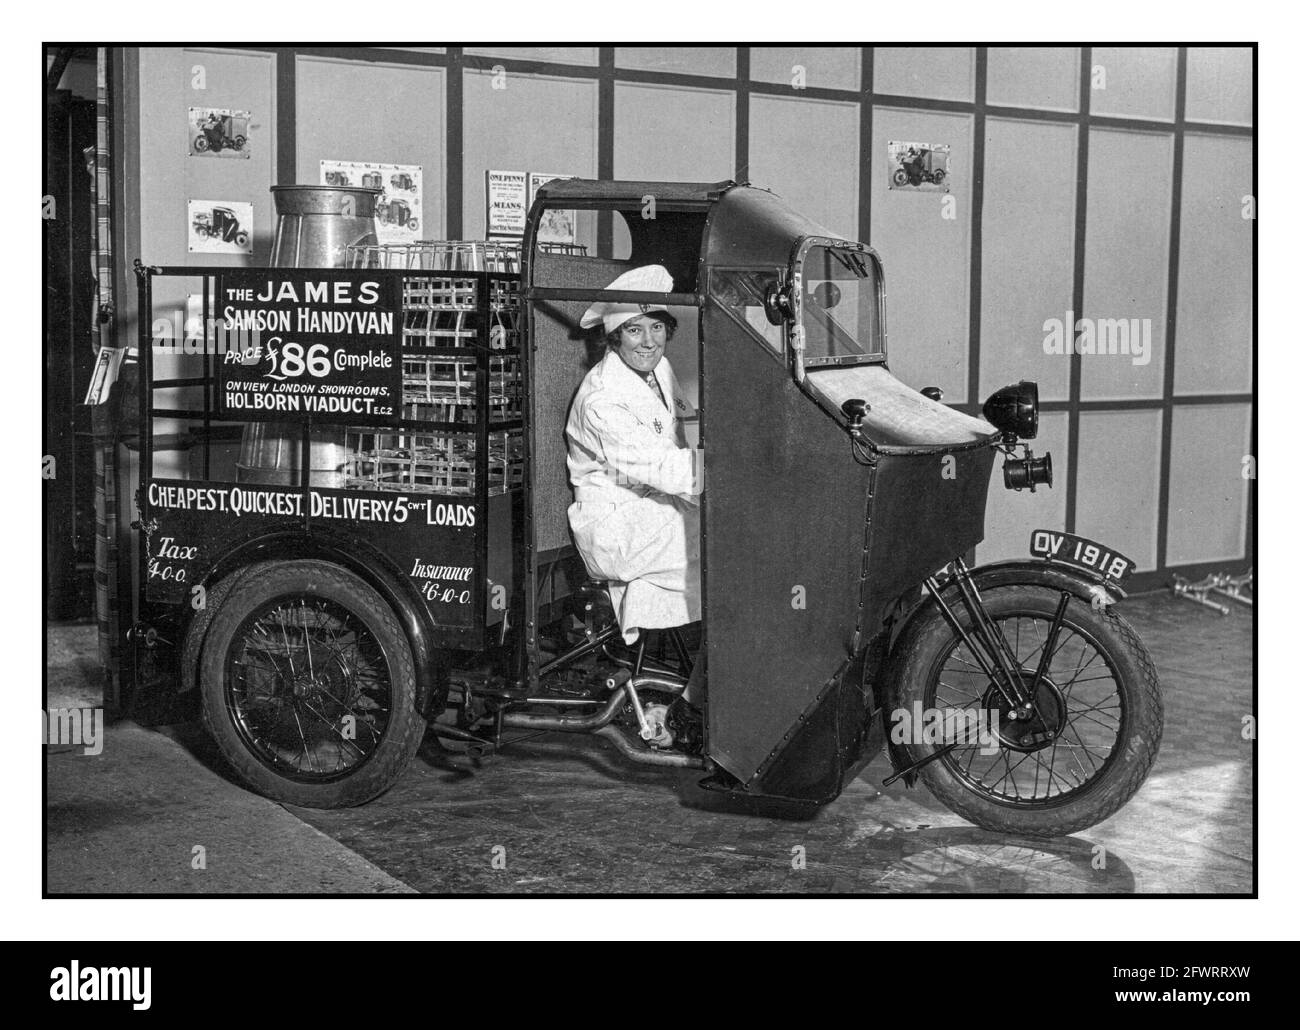 1900's ELECTRIC DELIVERY VEHICLE  James Samson Handyman electric milk delivery cart offered for sale at £86.00 complete. In-house promotional photograph with female driver UK Stock Photo